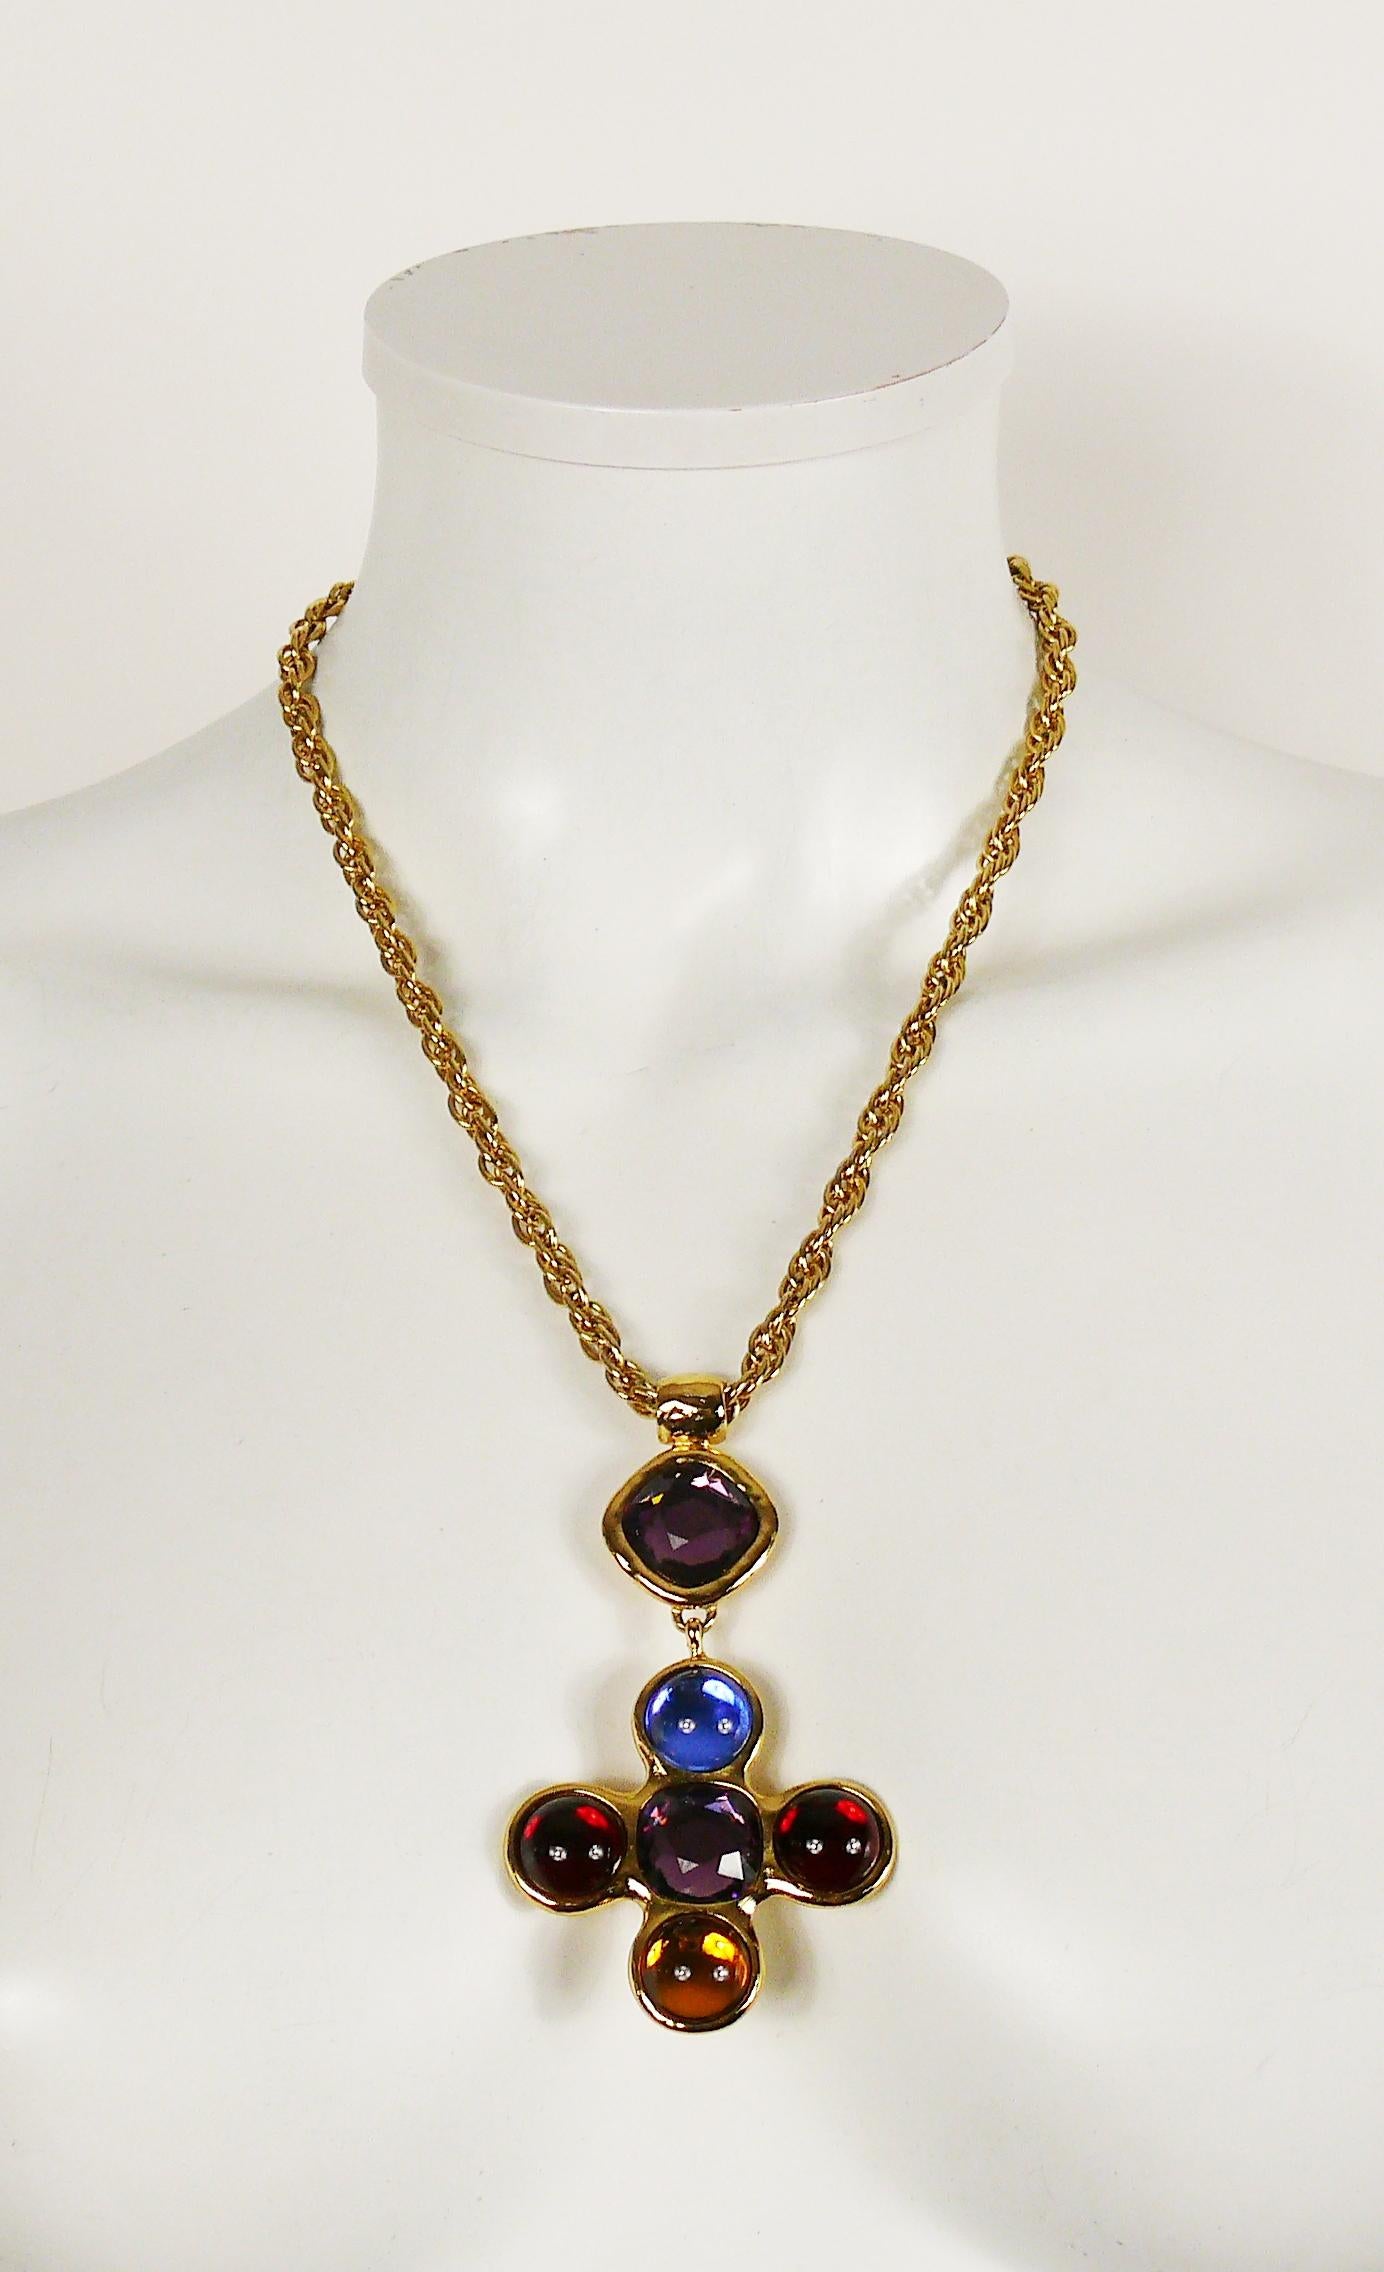 YVES SAINT LAURENT vintage gold toned chain necklace featuring a cross pendant embellished with purple crystals and multicolored glass stones.

Lobster clasp closure.
Extension chain.

Embossed YSL.
Made in France.

Indicative measurements :